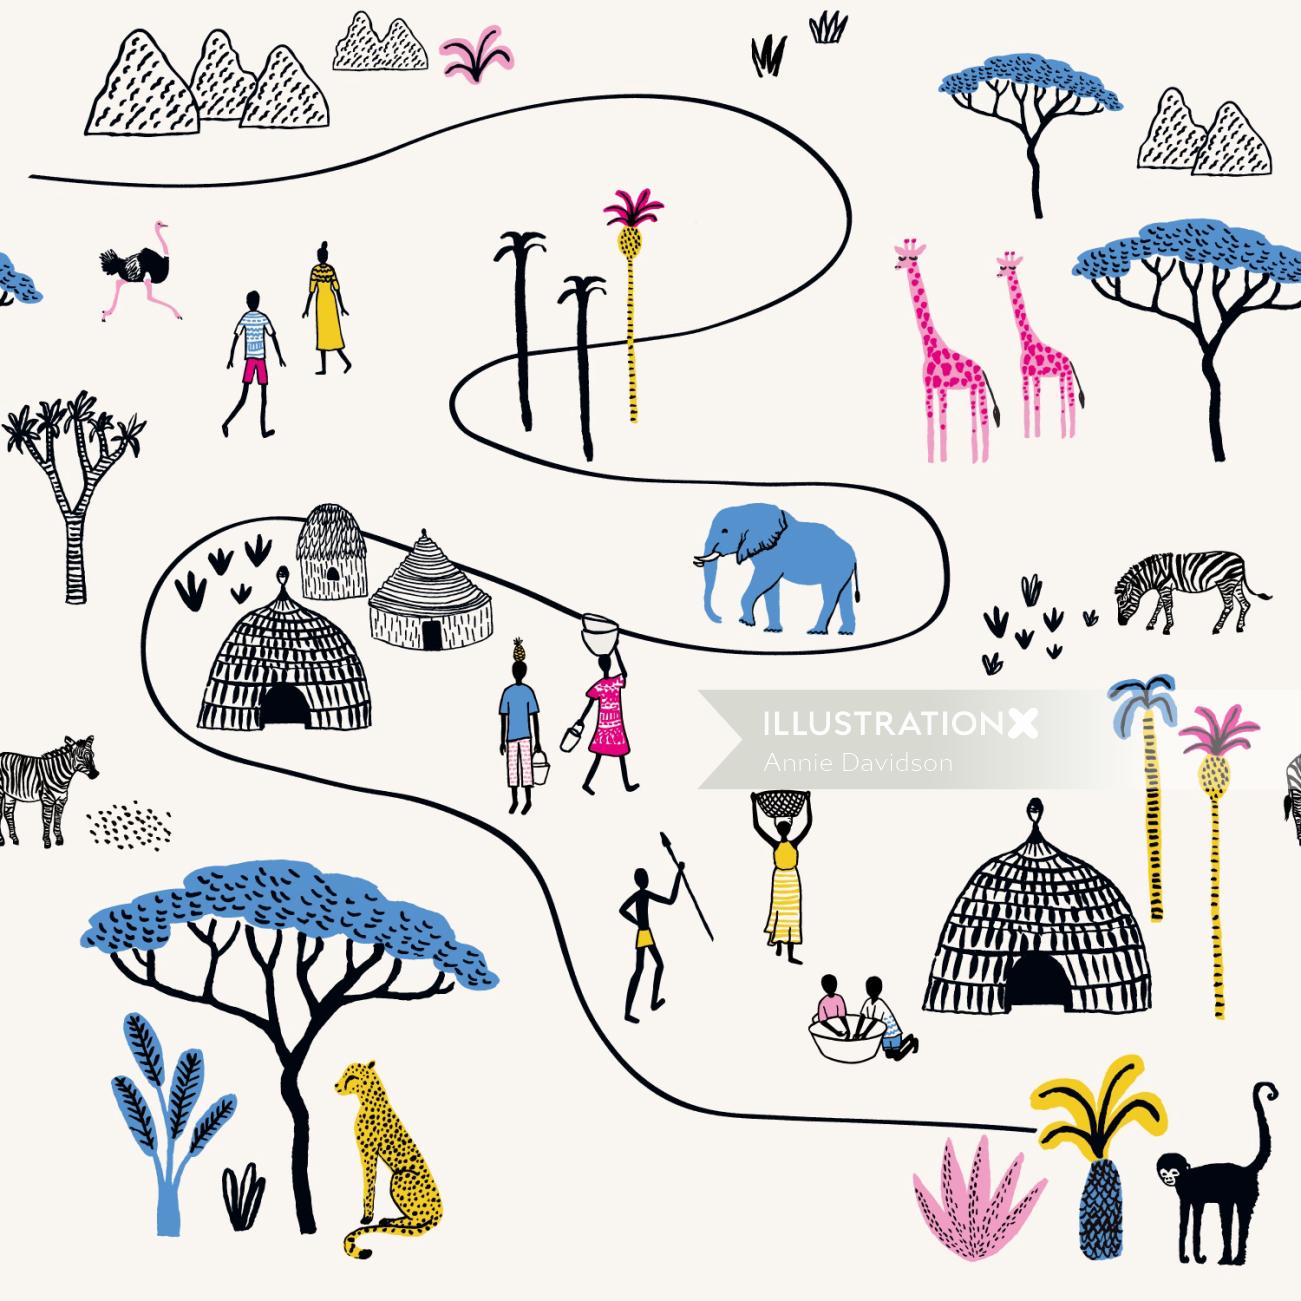 Coloured line drawing of Serengeti animals, people